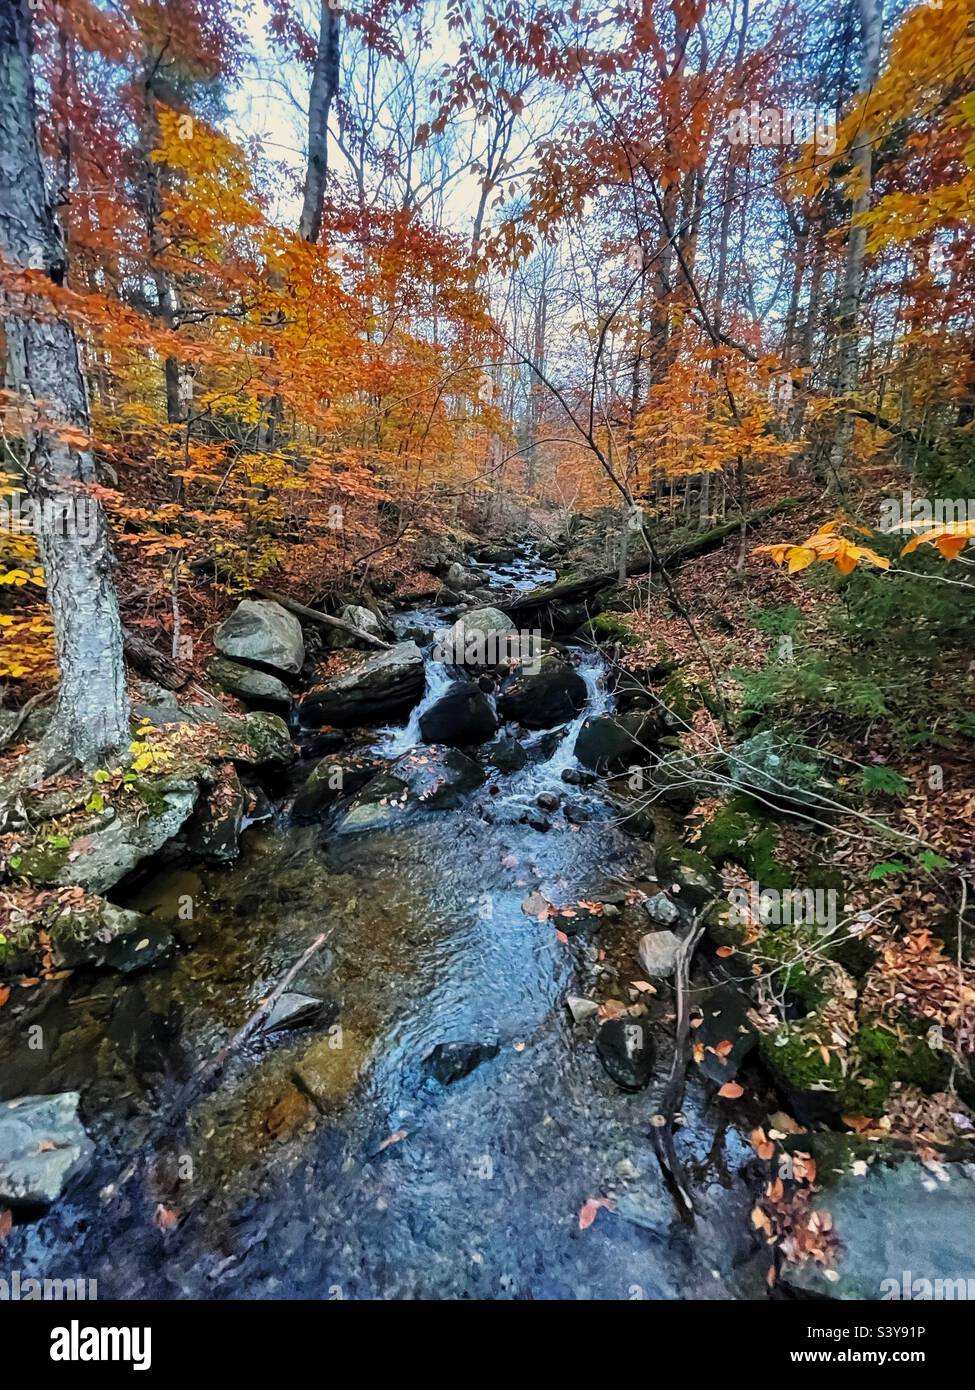 Water flows over rocks in a creek during the fall leaves. Stock Photo